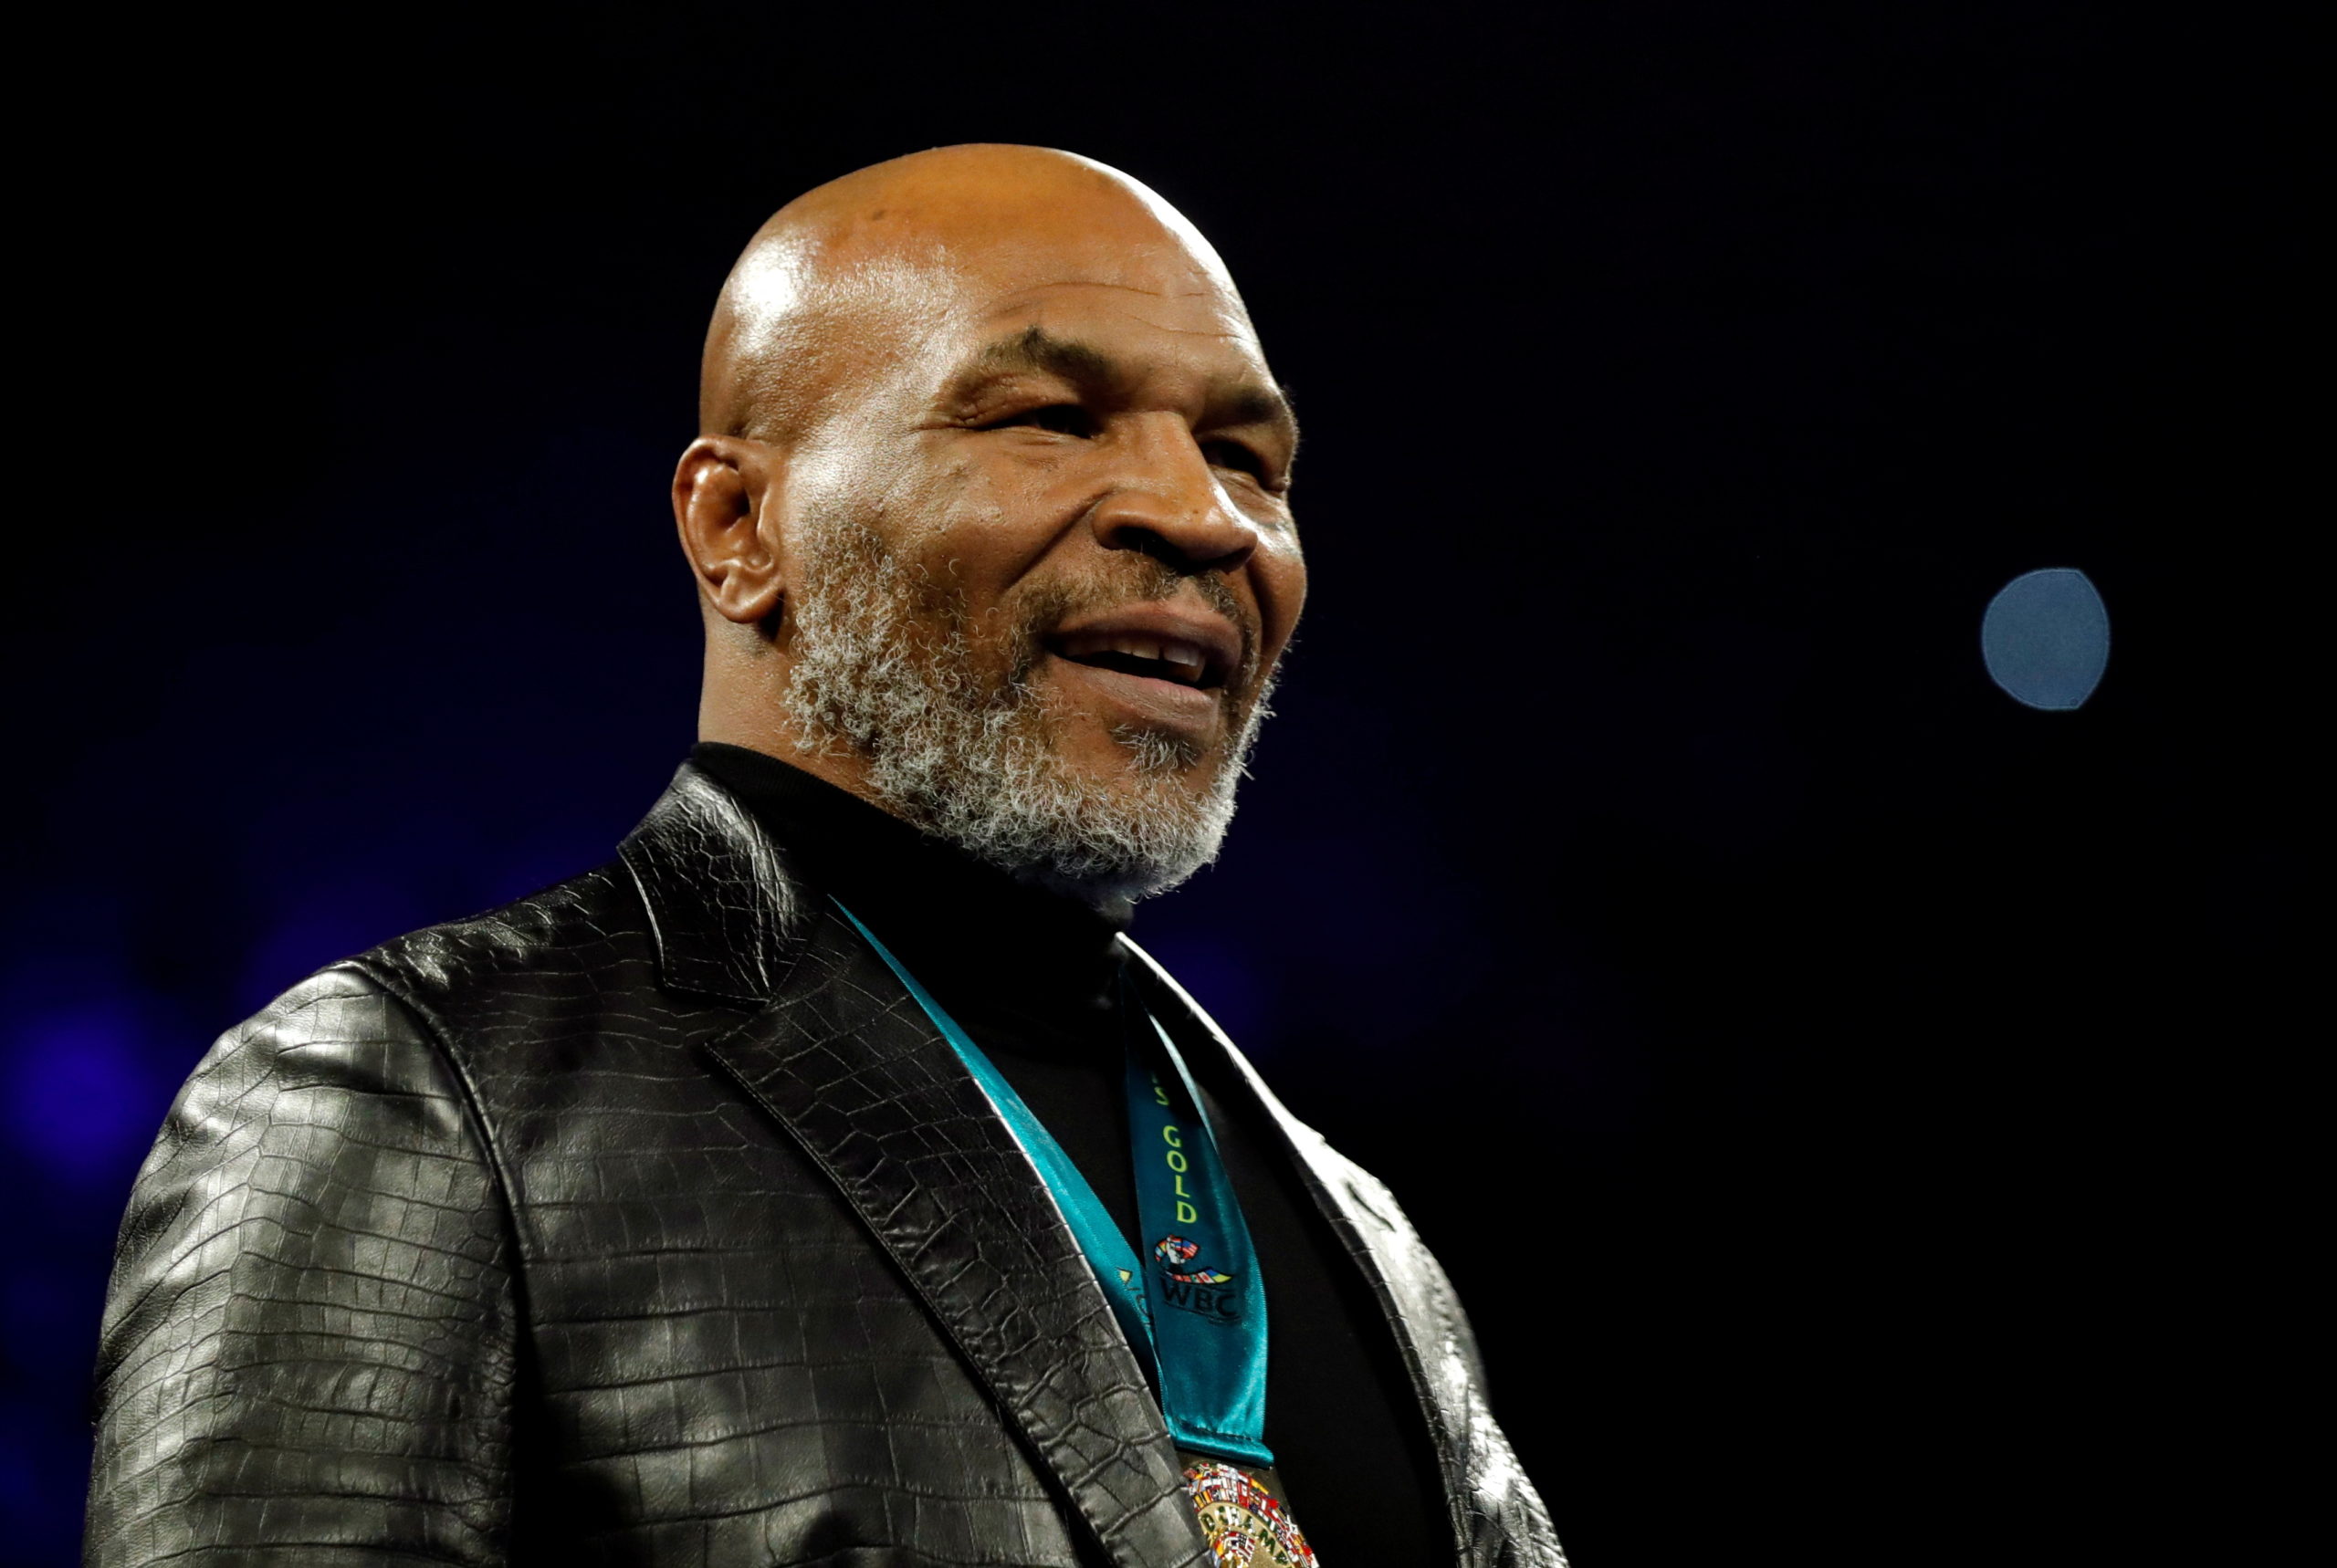 FILE PHOTO: Boxing - Deontay Wilder v Tyson Fury - WBC Heavyweight Title - The Grand Garden Arena at MGM Grand, Las Vegas, United States - February 22, 2020 Former boxer Mike Tyson before the fight